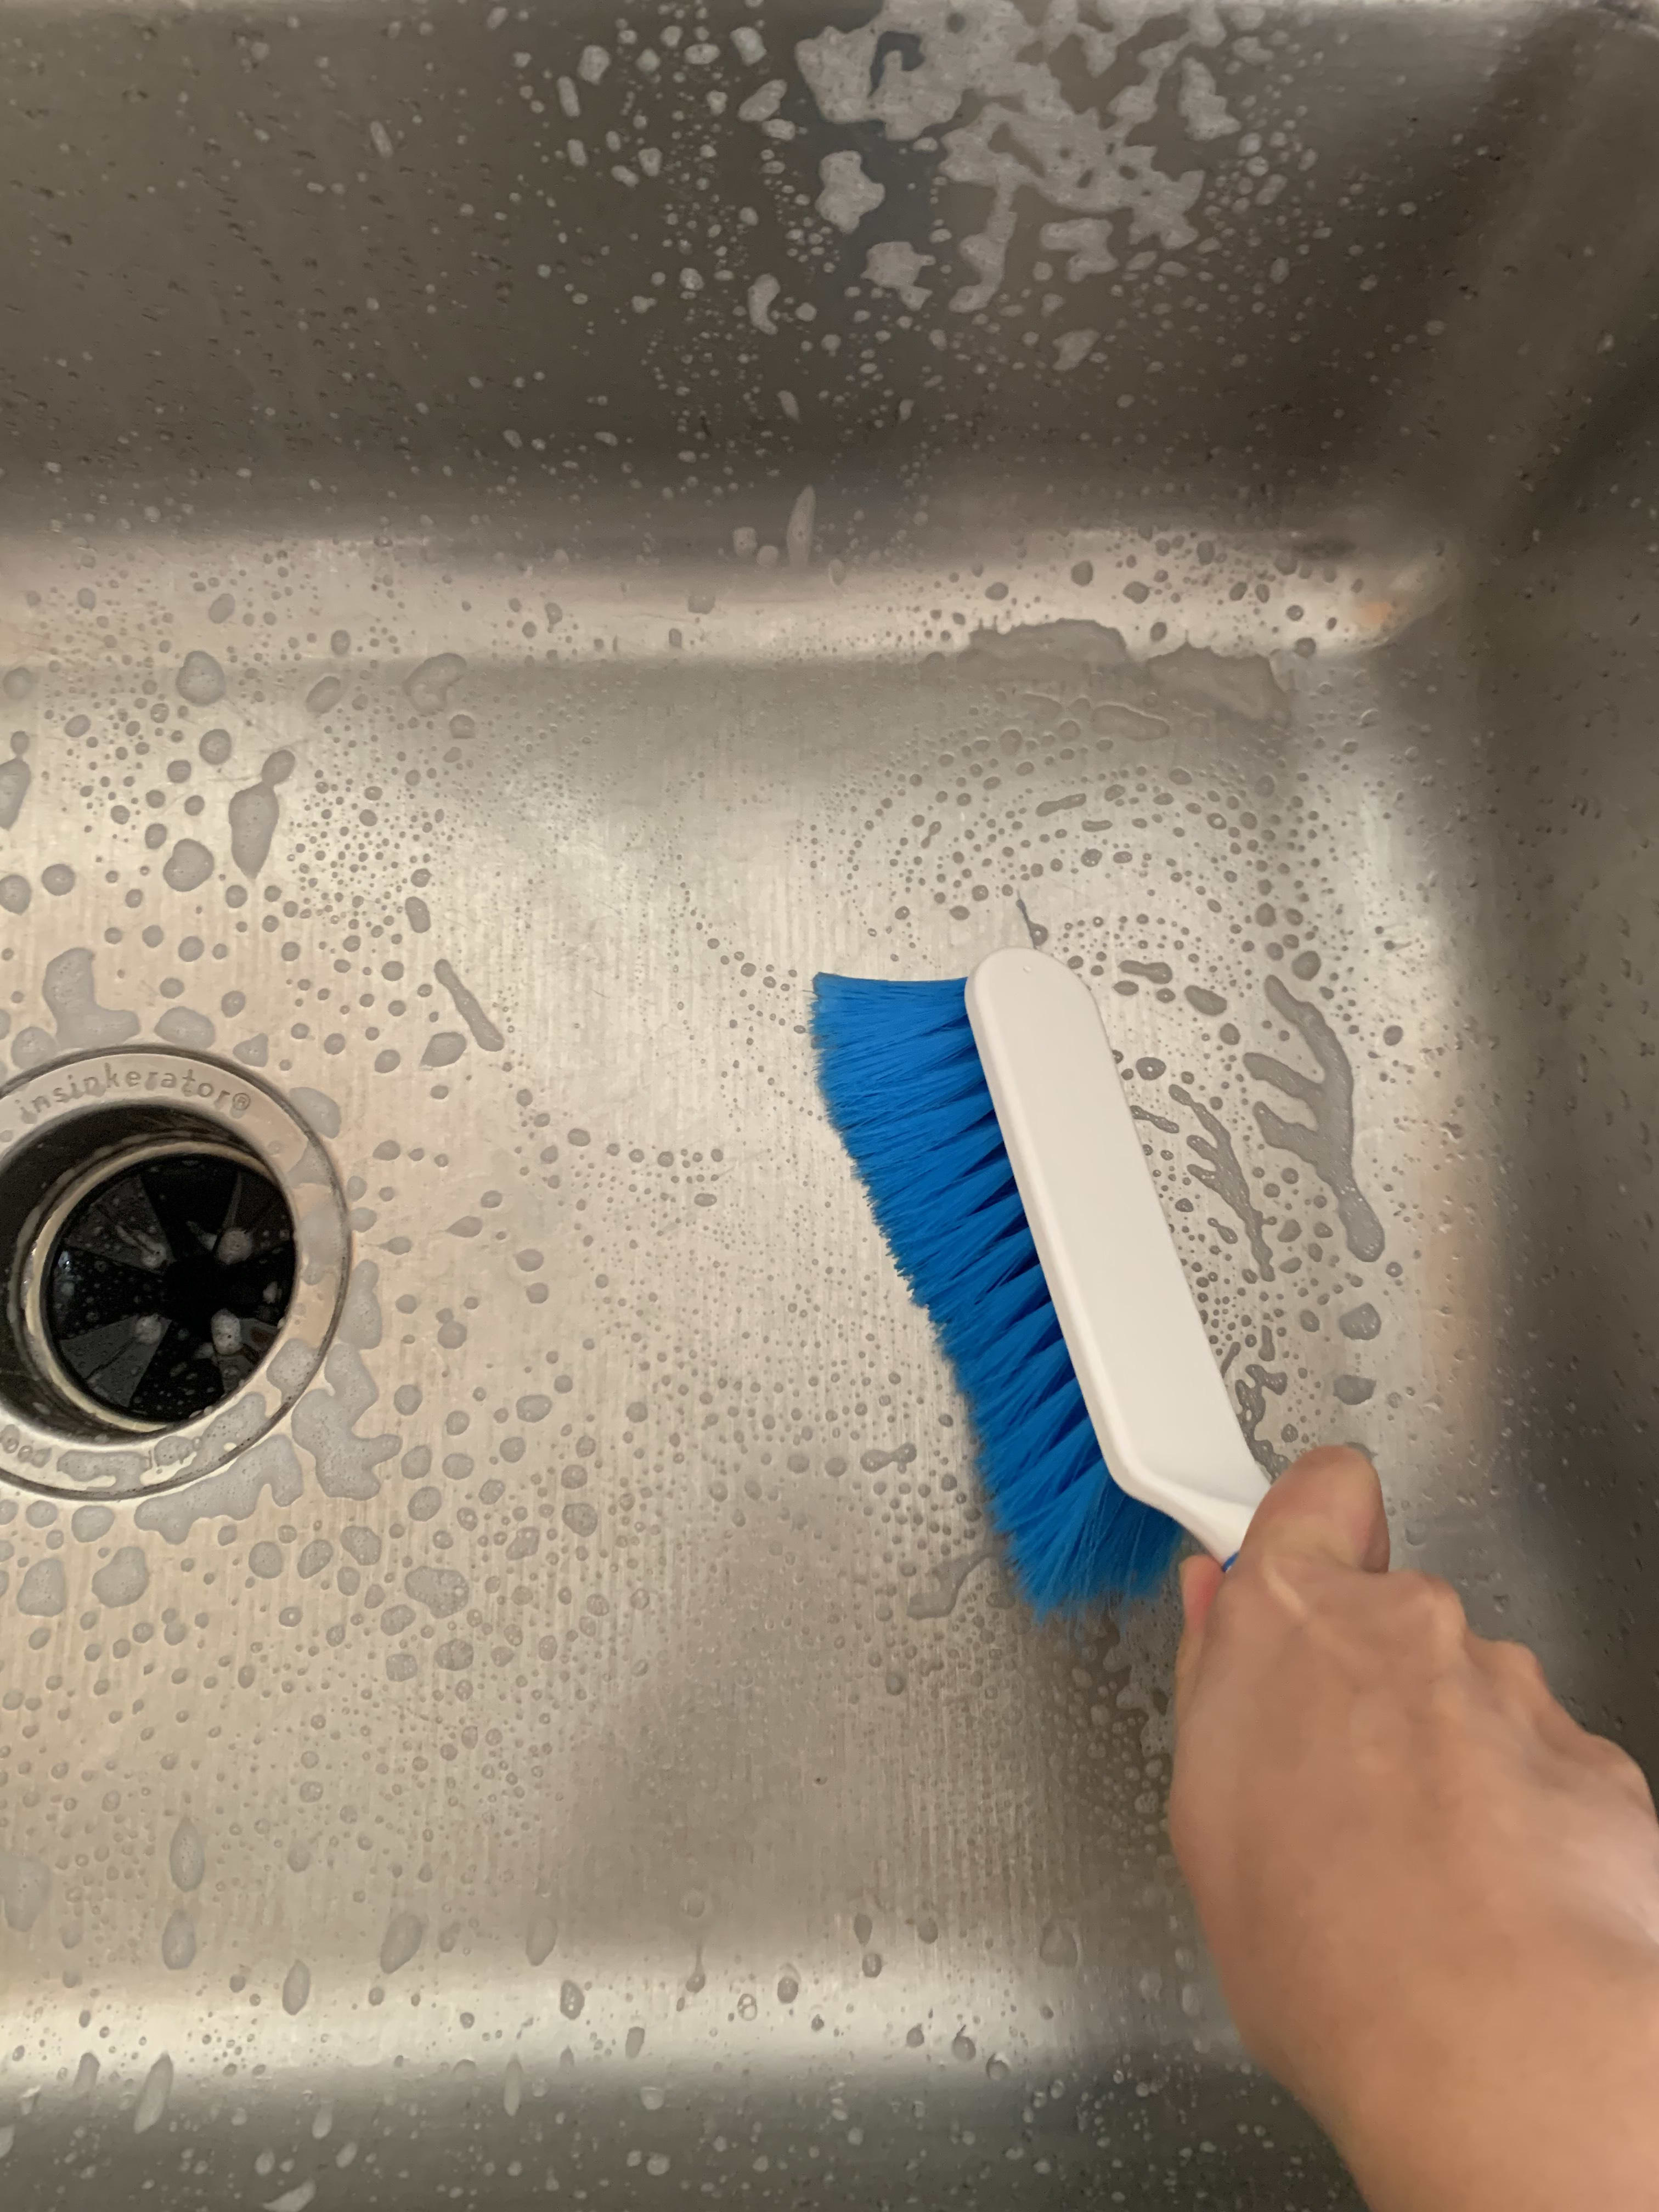 This Dollar Tree Brush Is Great for Cleaning Your Kitchen Sink